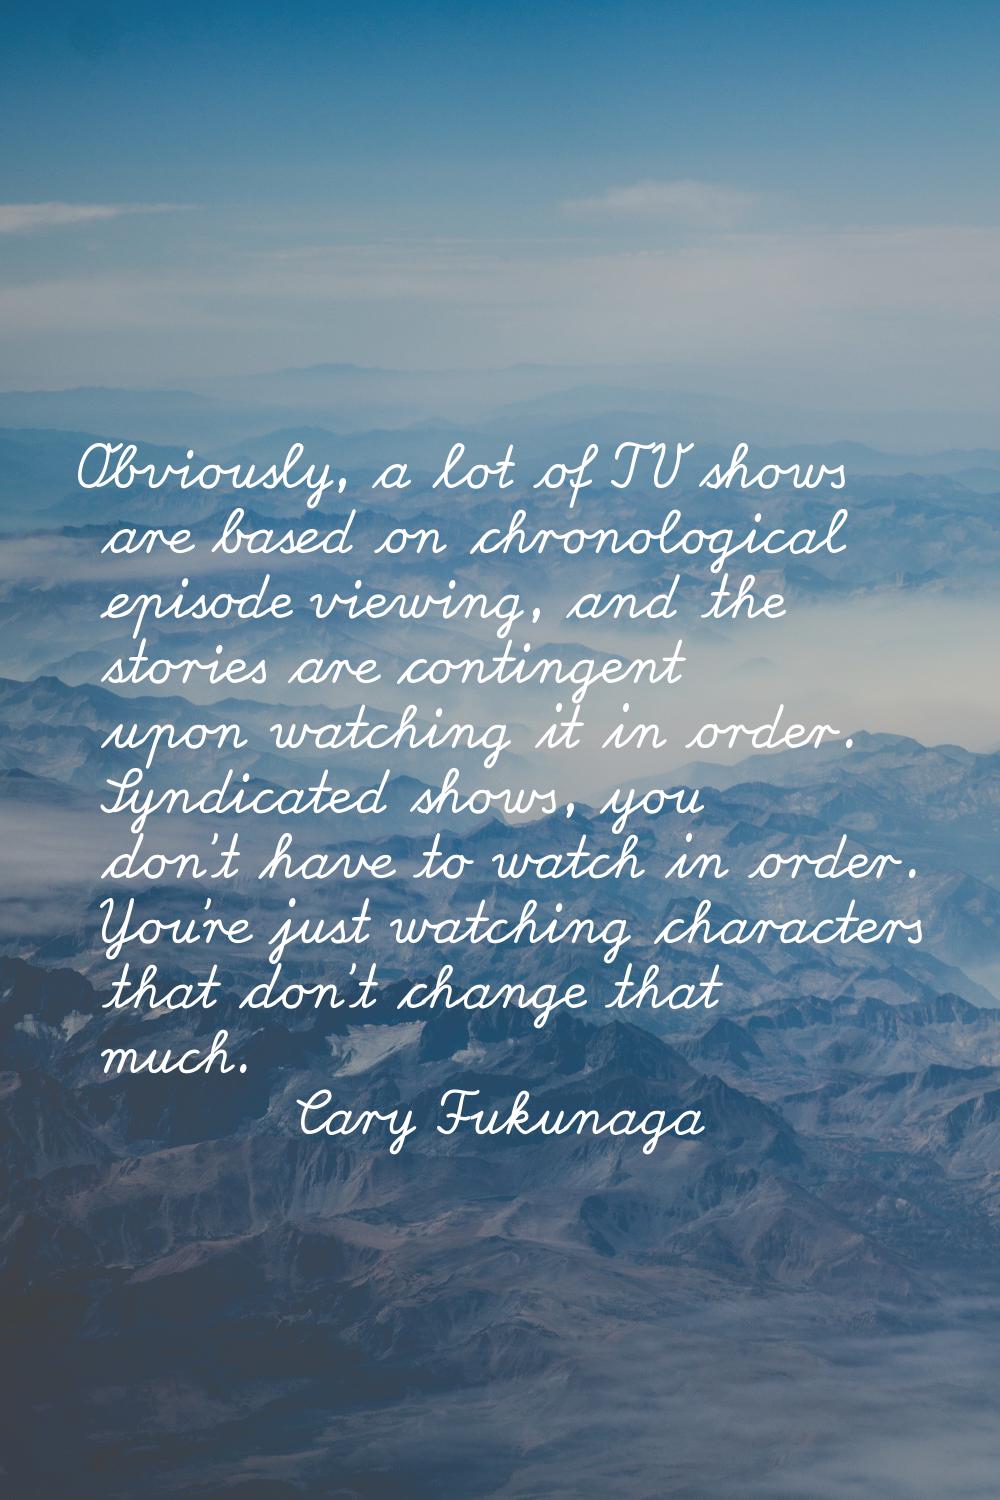 Obviously, a lot of TV shows are based on chronological episode viewing, and the stories are contin